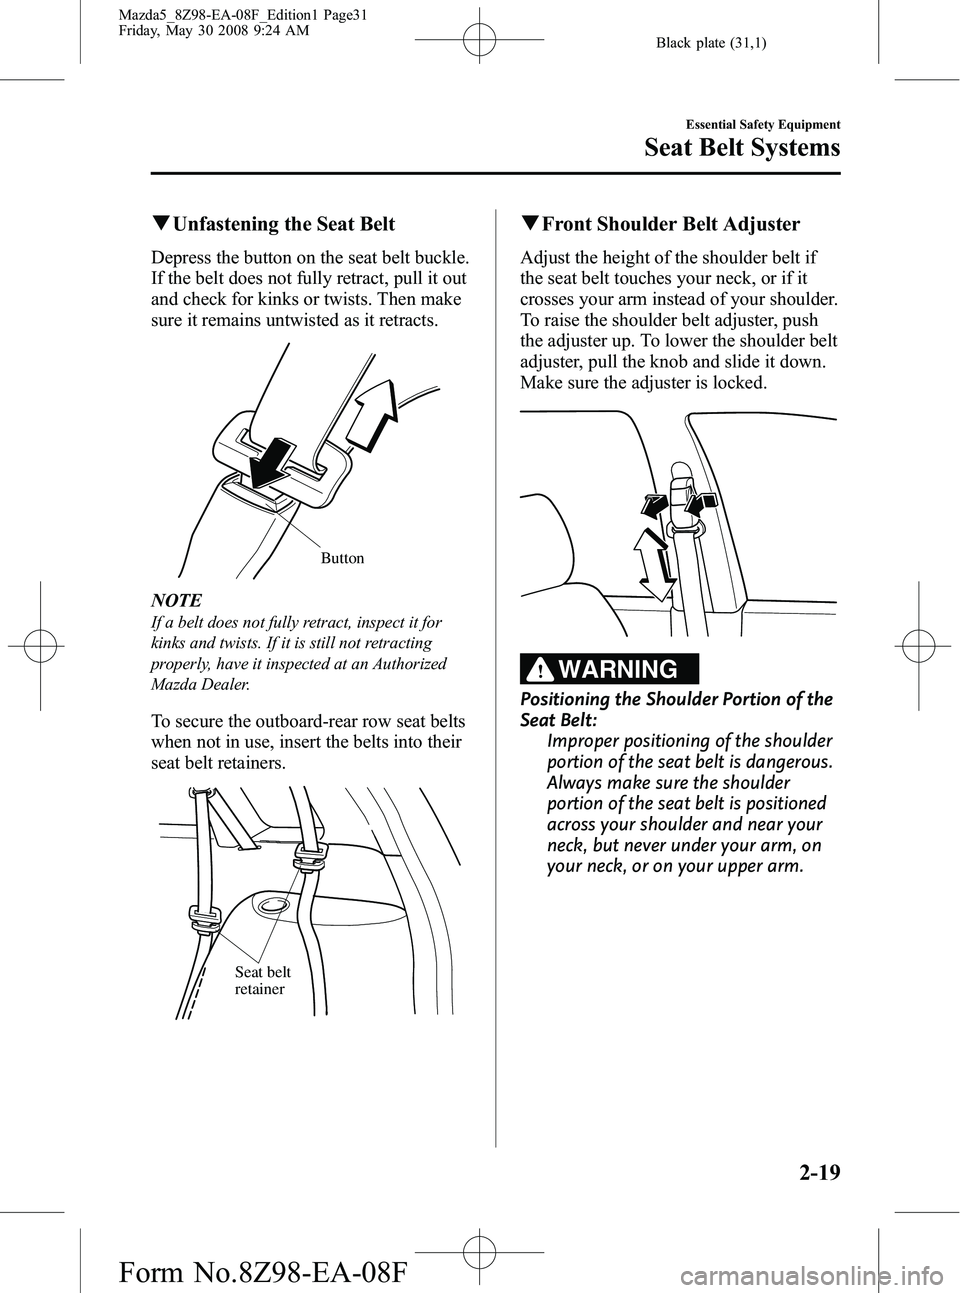 MAZDA MODEL 5 2009 Owners Guide Black plate (31,1)
qUnfastening the Seat Belt
Depress the button on the seat belt buckle.
If the belt does not fully retract, pull it out
and check for kinks or twists. Then make
sure it remains untwi